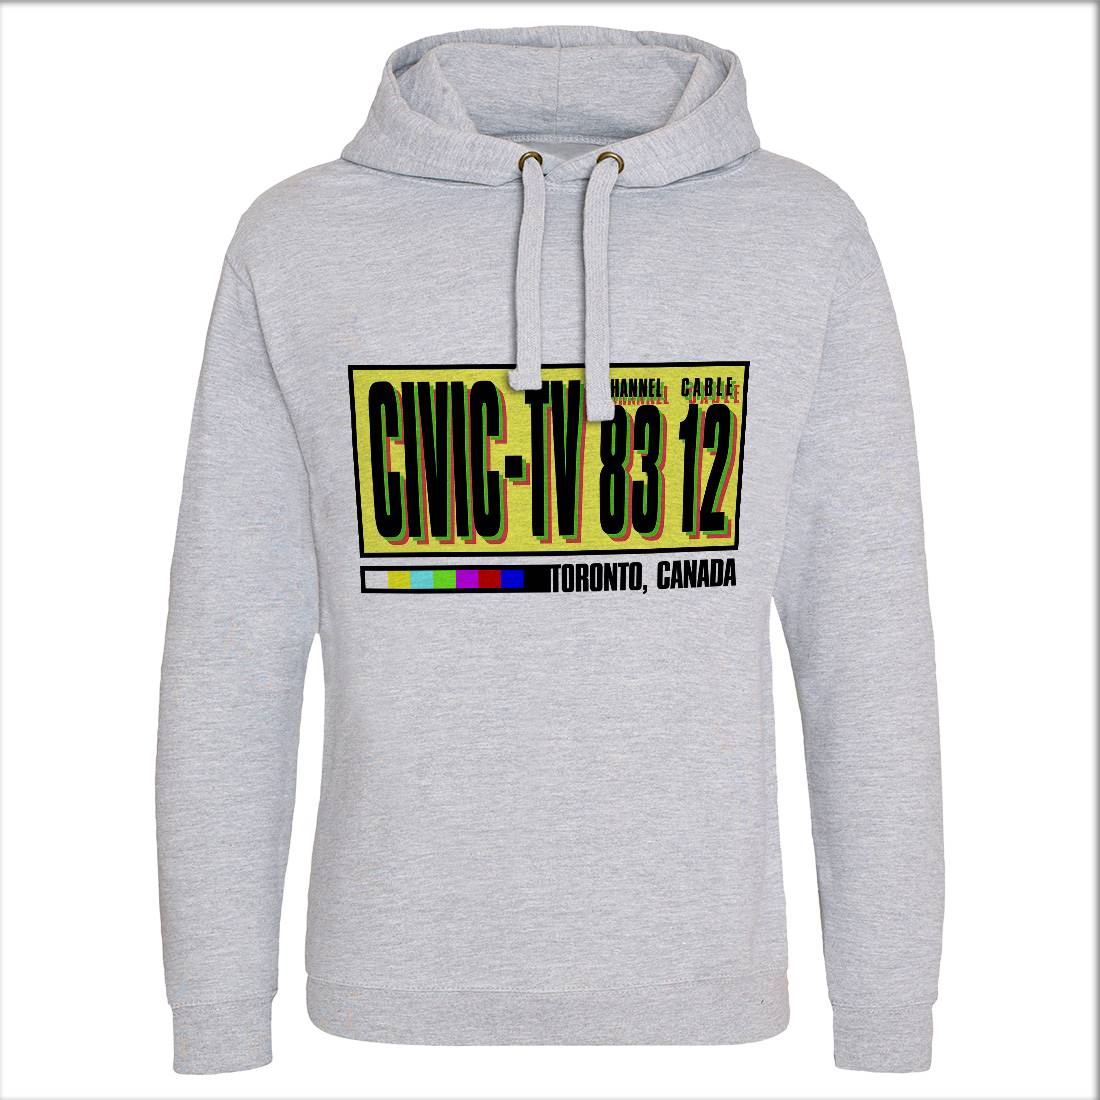 Civic-Tv Mens Hoodie Without Pocket Media D406